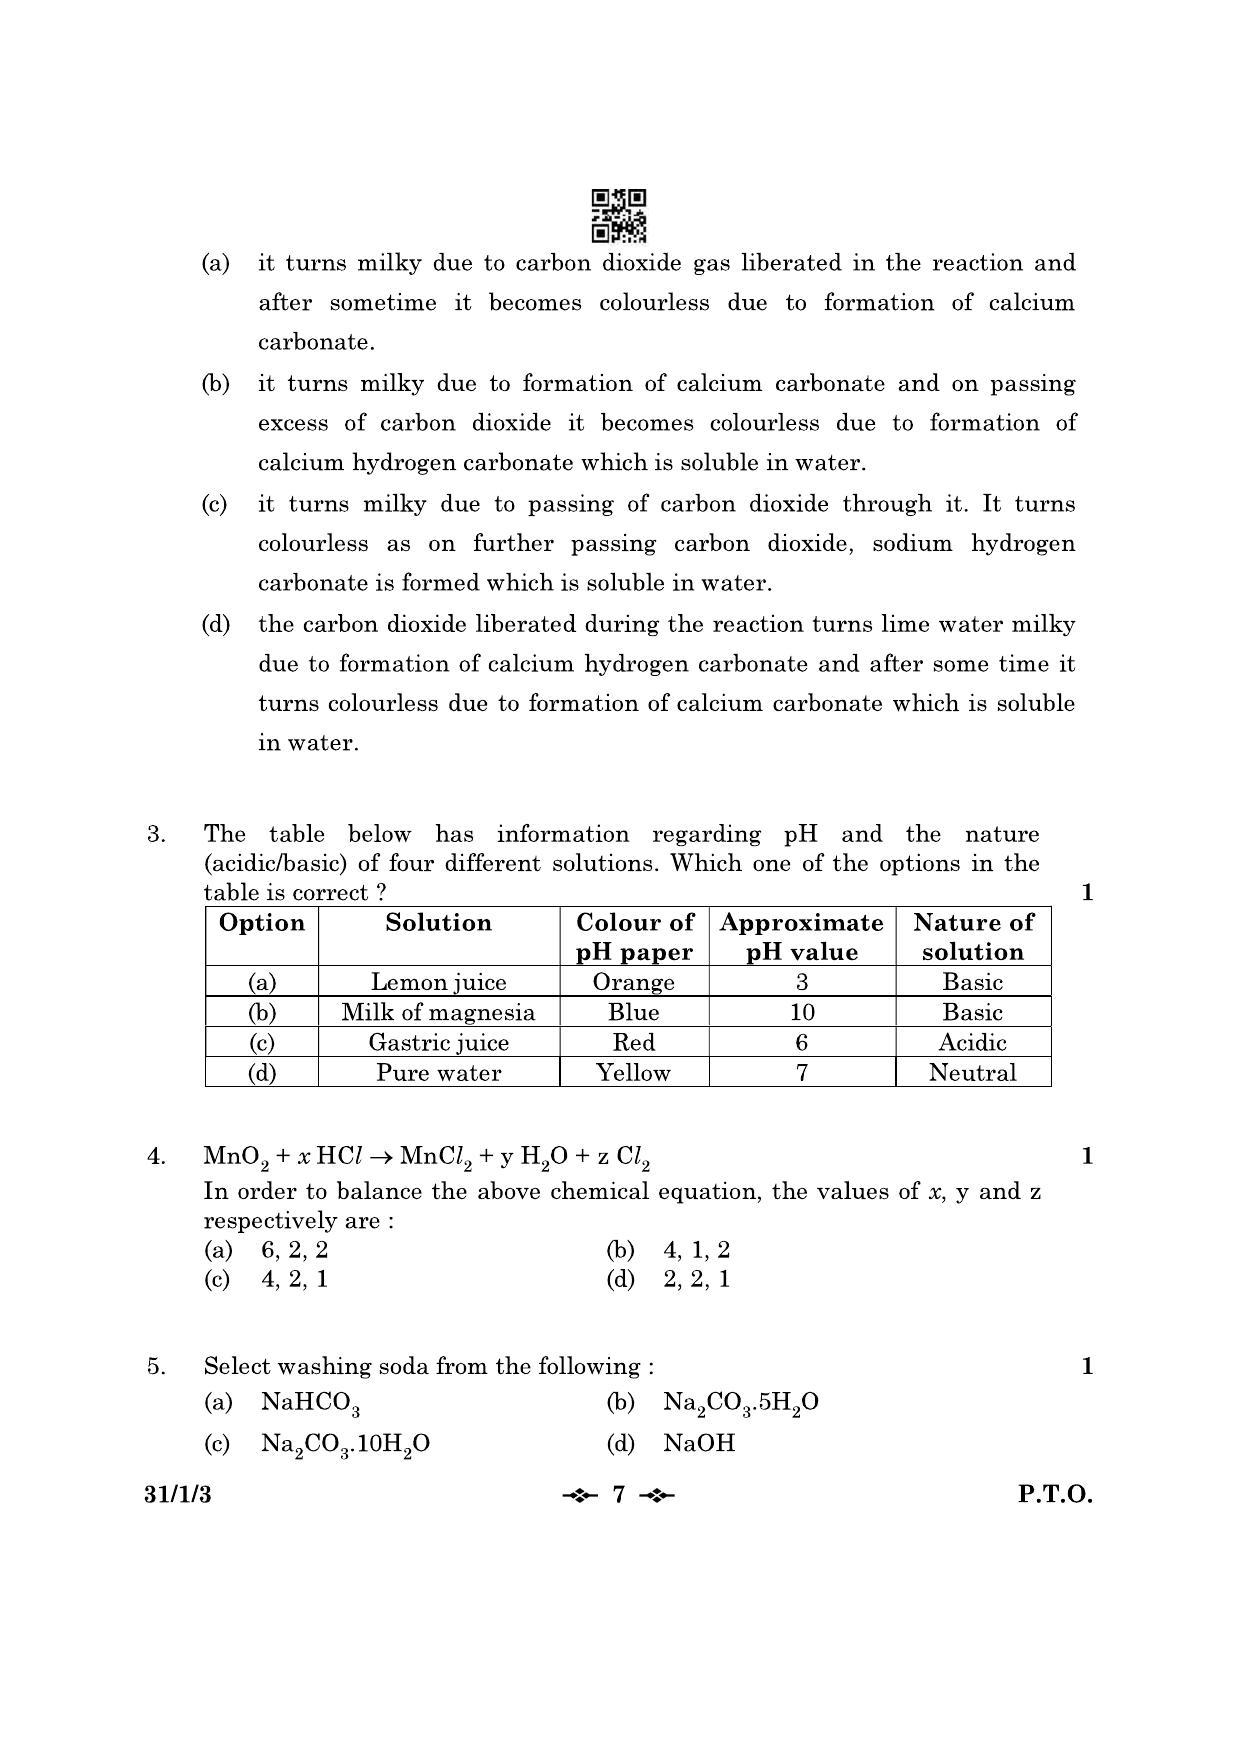 CBSE Class 10 31-1-3 Science 2023 Question Paper - Page 7